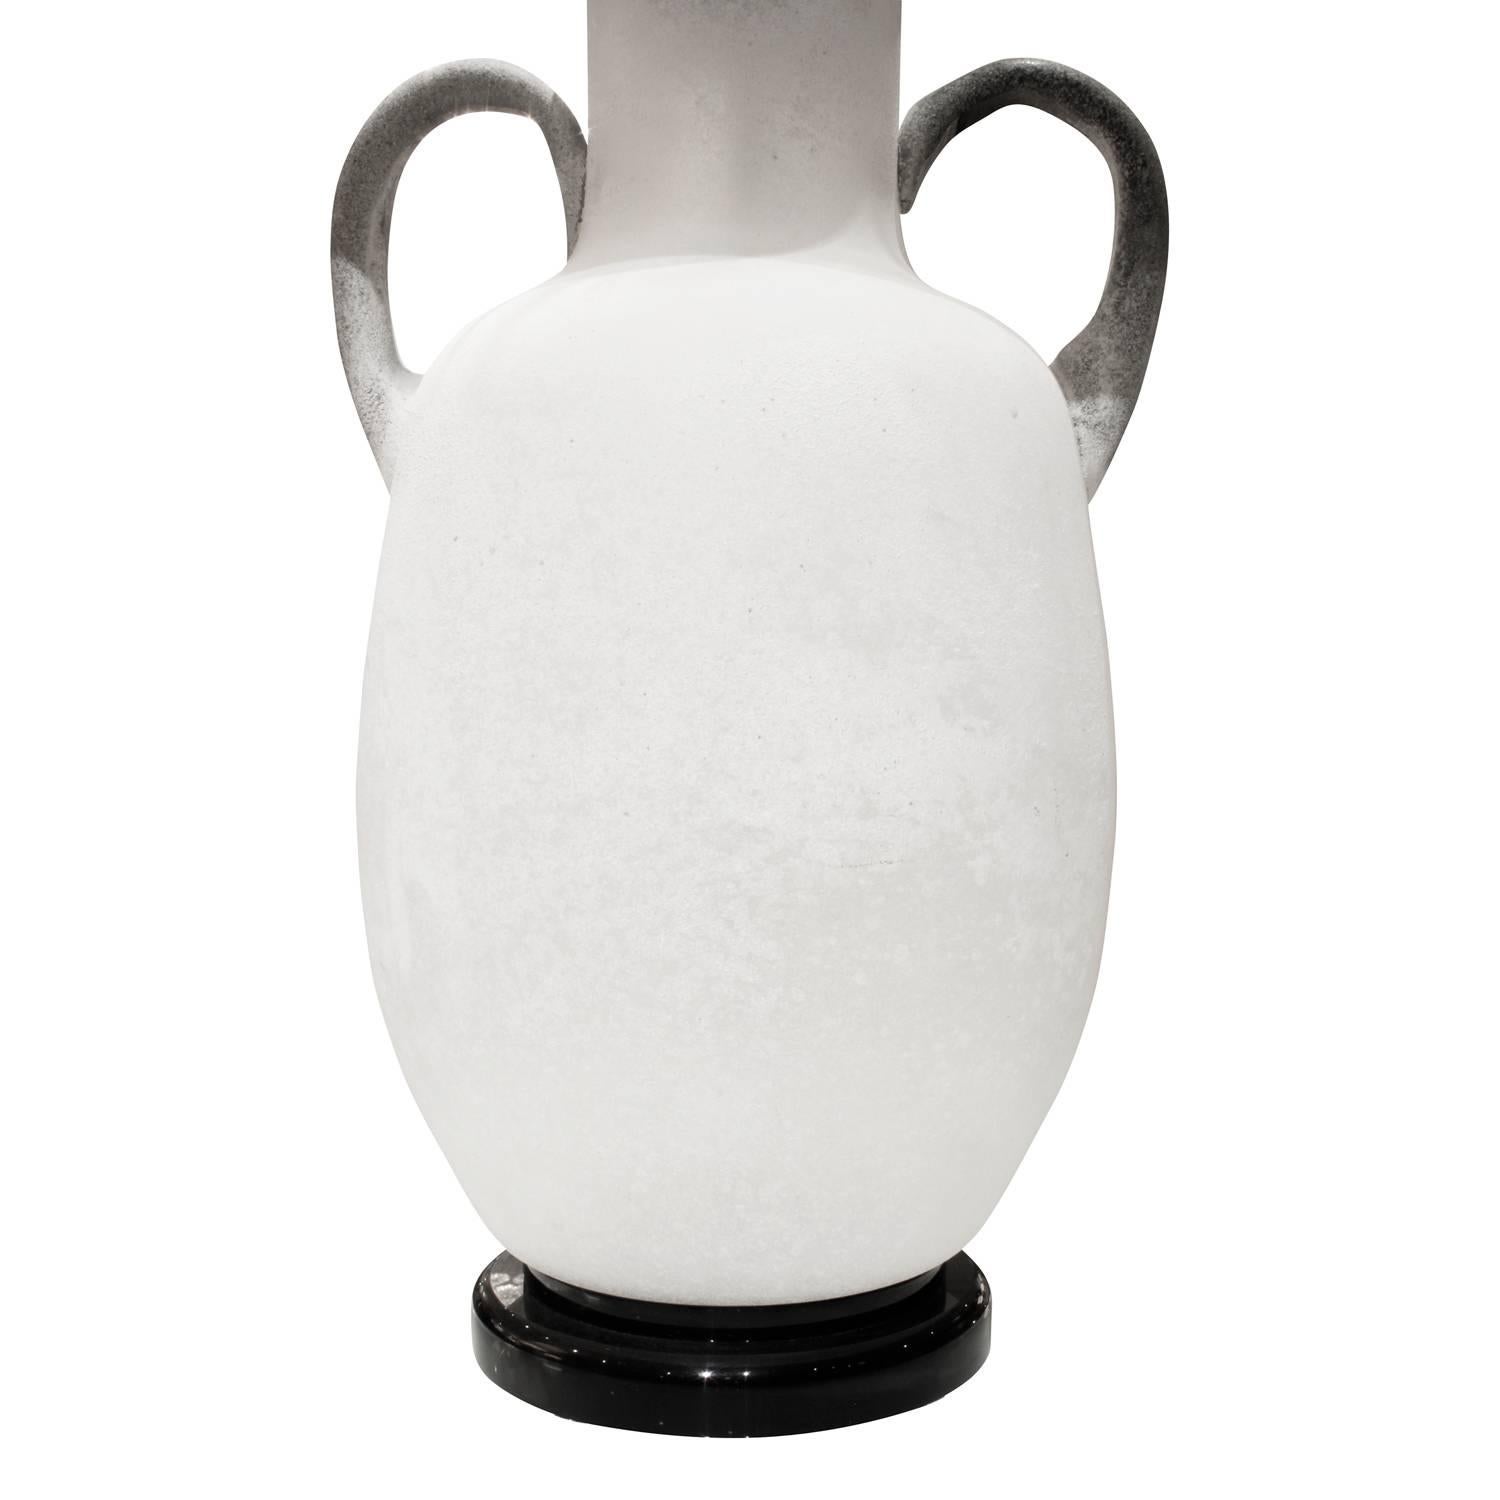 Large handblown white scavo glass Amphora style table lamp by Seguso, Murano Italy, 1960s. Shade as shown is 14.25 inches in diameter. This lamp is beautifully executed and very chic.